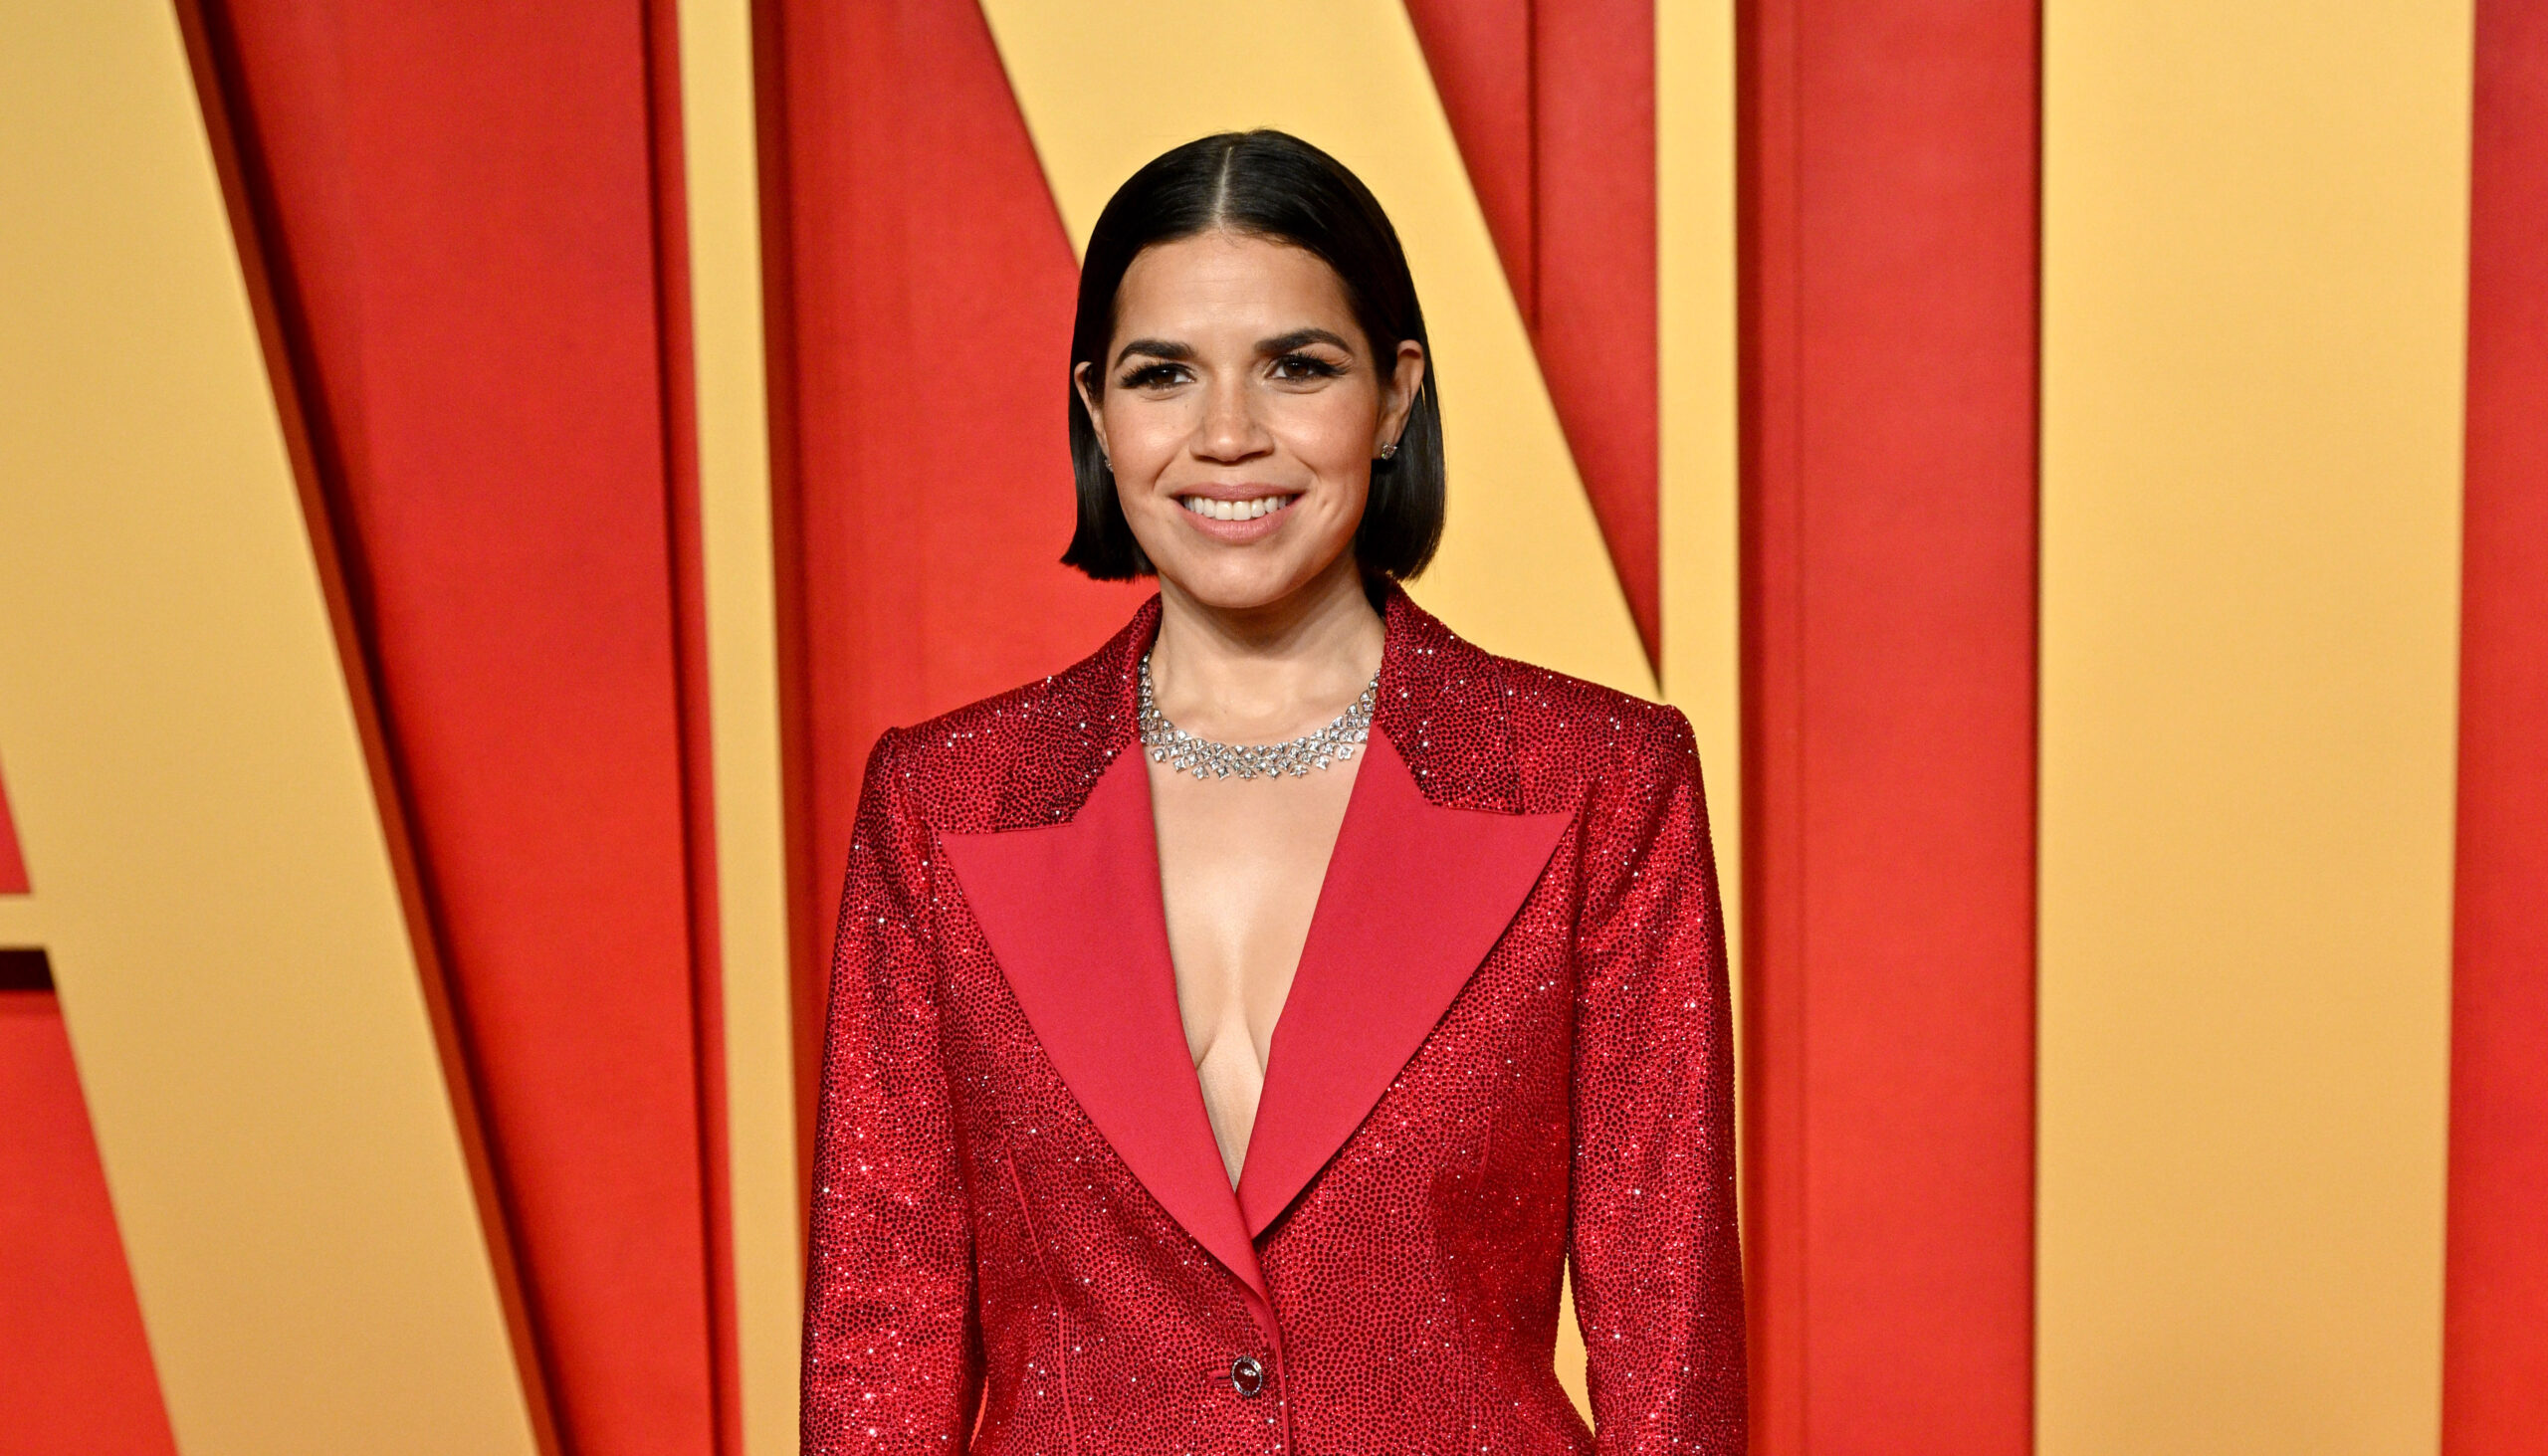 America Ferrera stands with confidence on the Vanity Fair Oscar Party red carpet, wearing a vibrant red, sparkling Versace jacket and black bottoms, accessorized with sheer black stockings and high platform heels.